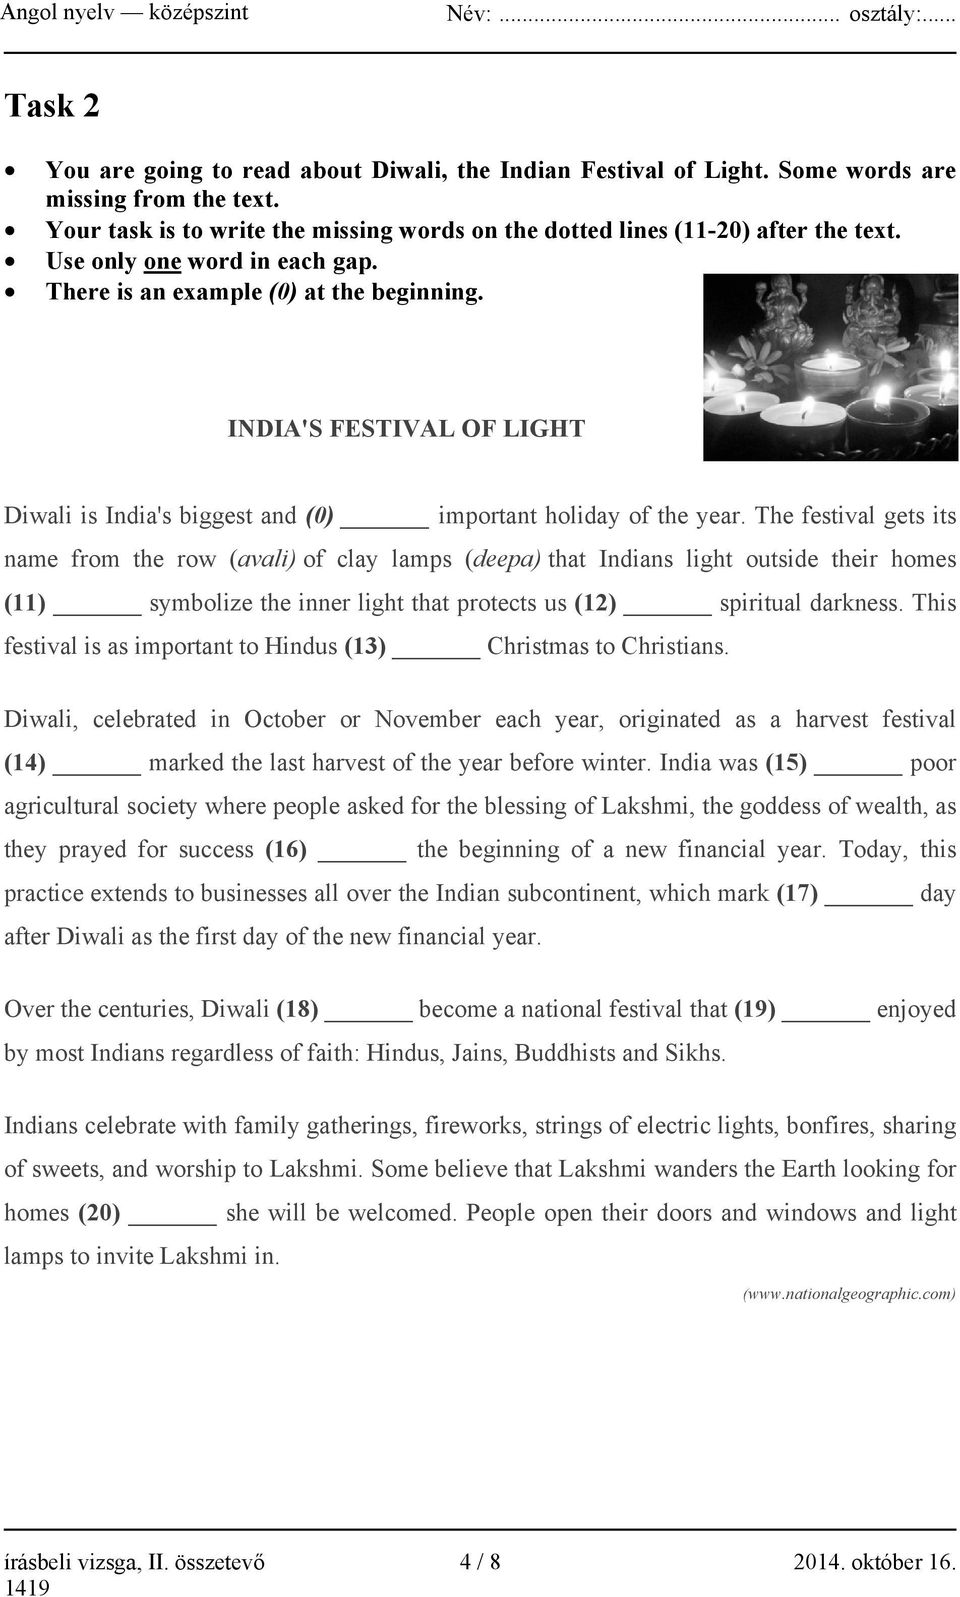 The festival gets its name from the row (avali) of clay lamps (deepa) that Indians light outside their homes (11) symbolize the inner light that protects us (12) spiritual darkness.